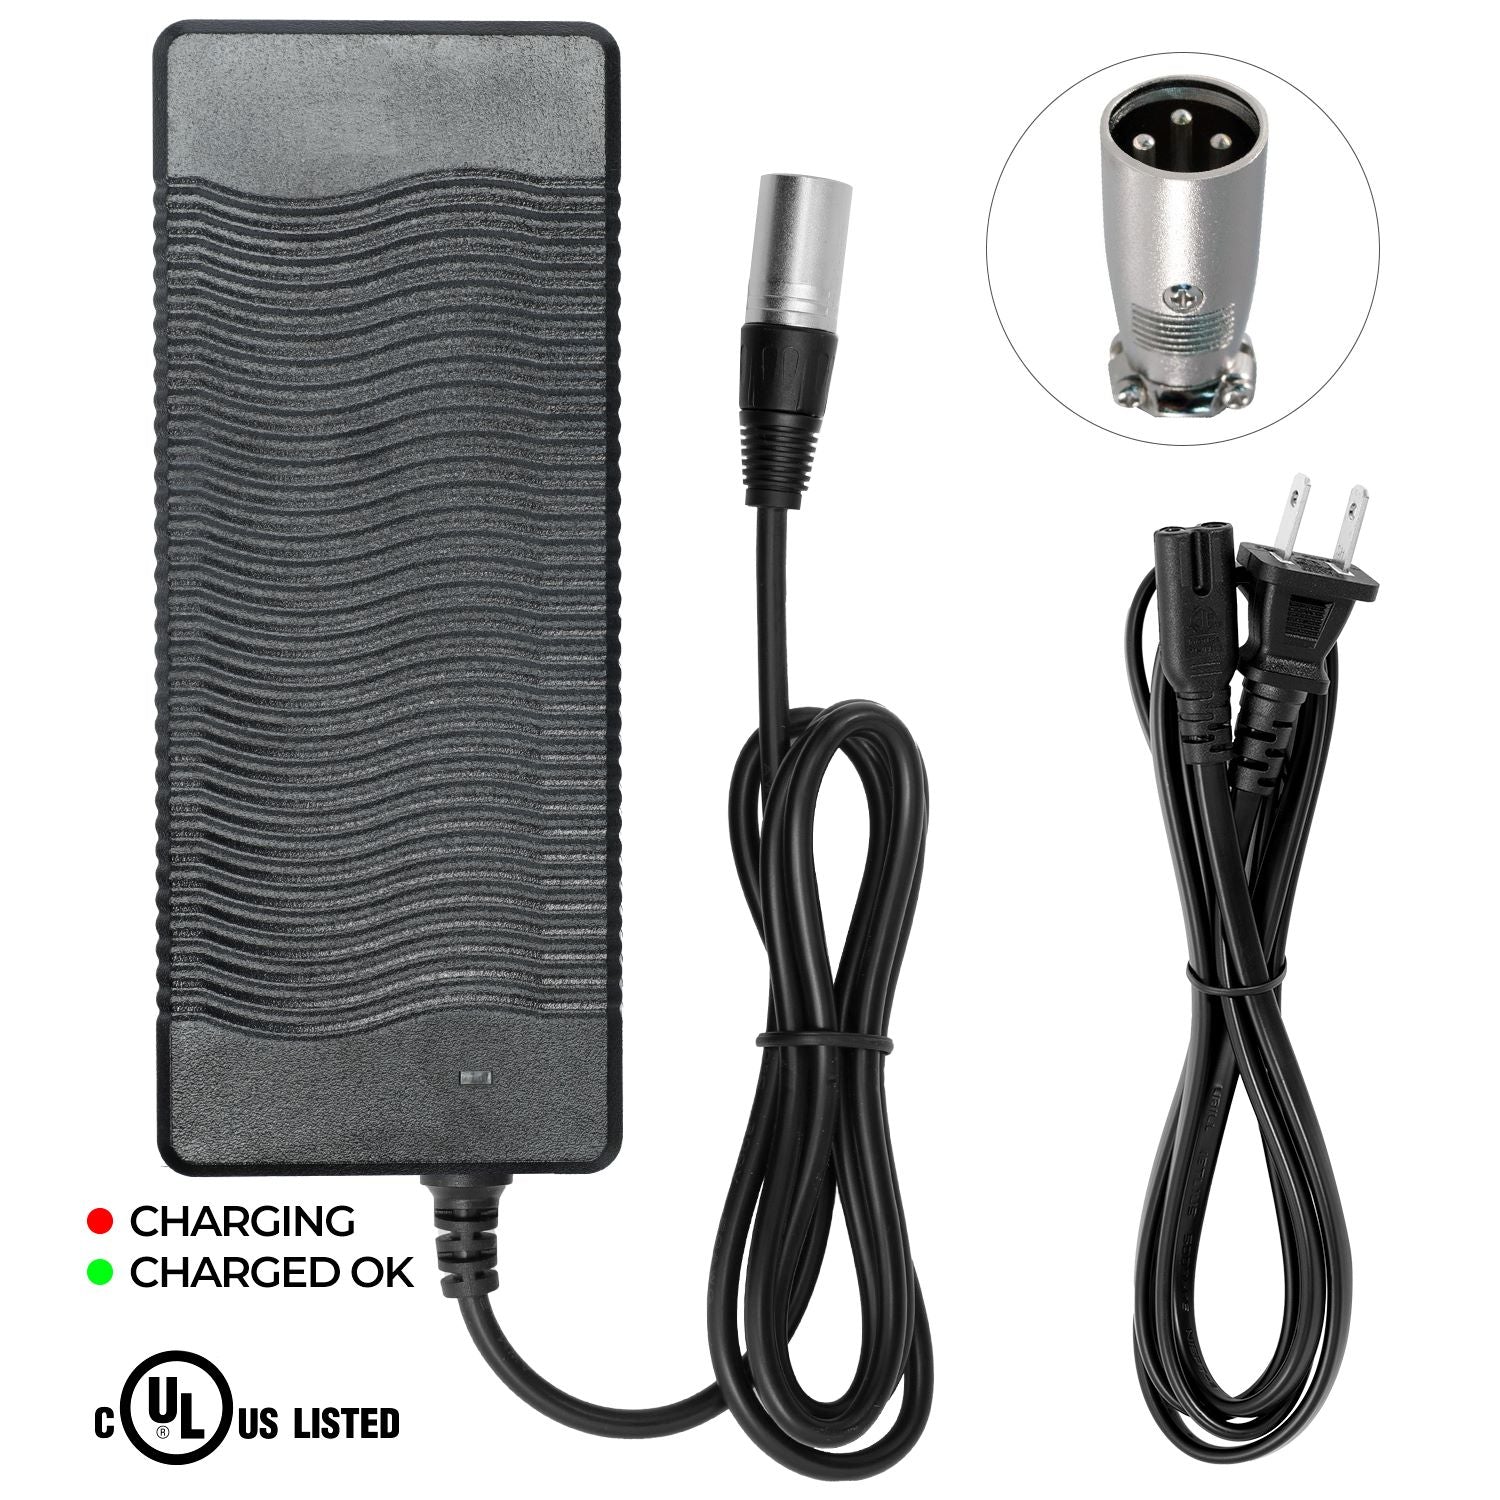 UL Listed Charger for Pedego Stretch eBike (NOT for Other Pedego Models,Please Check the DC Shape Carefully)